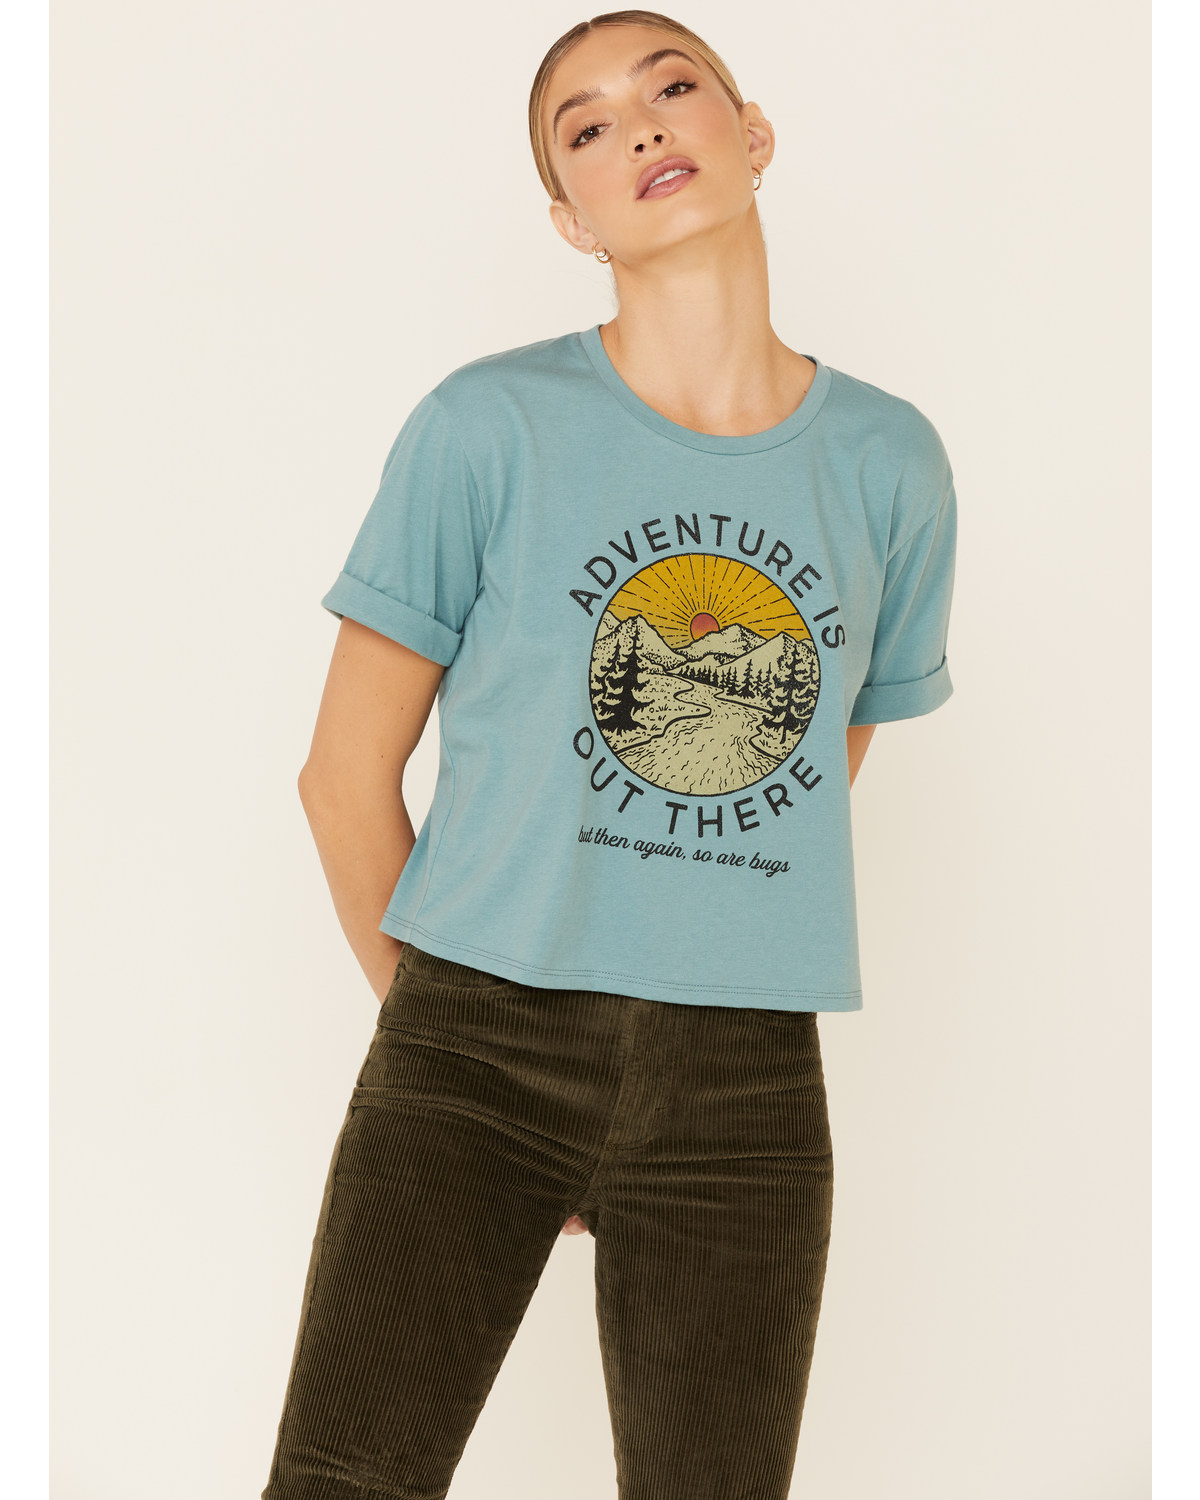 Cut & Paste Women's Sage Adventure Is Out There Graphic Cropped Tee